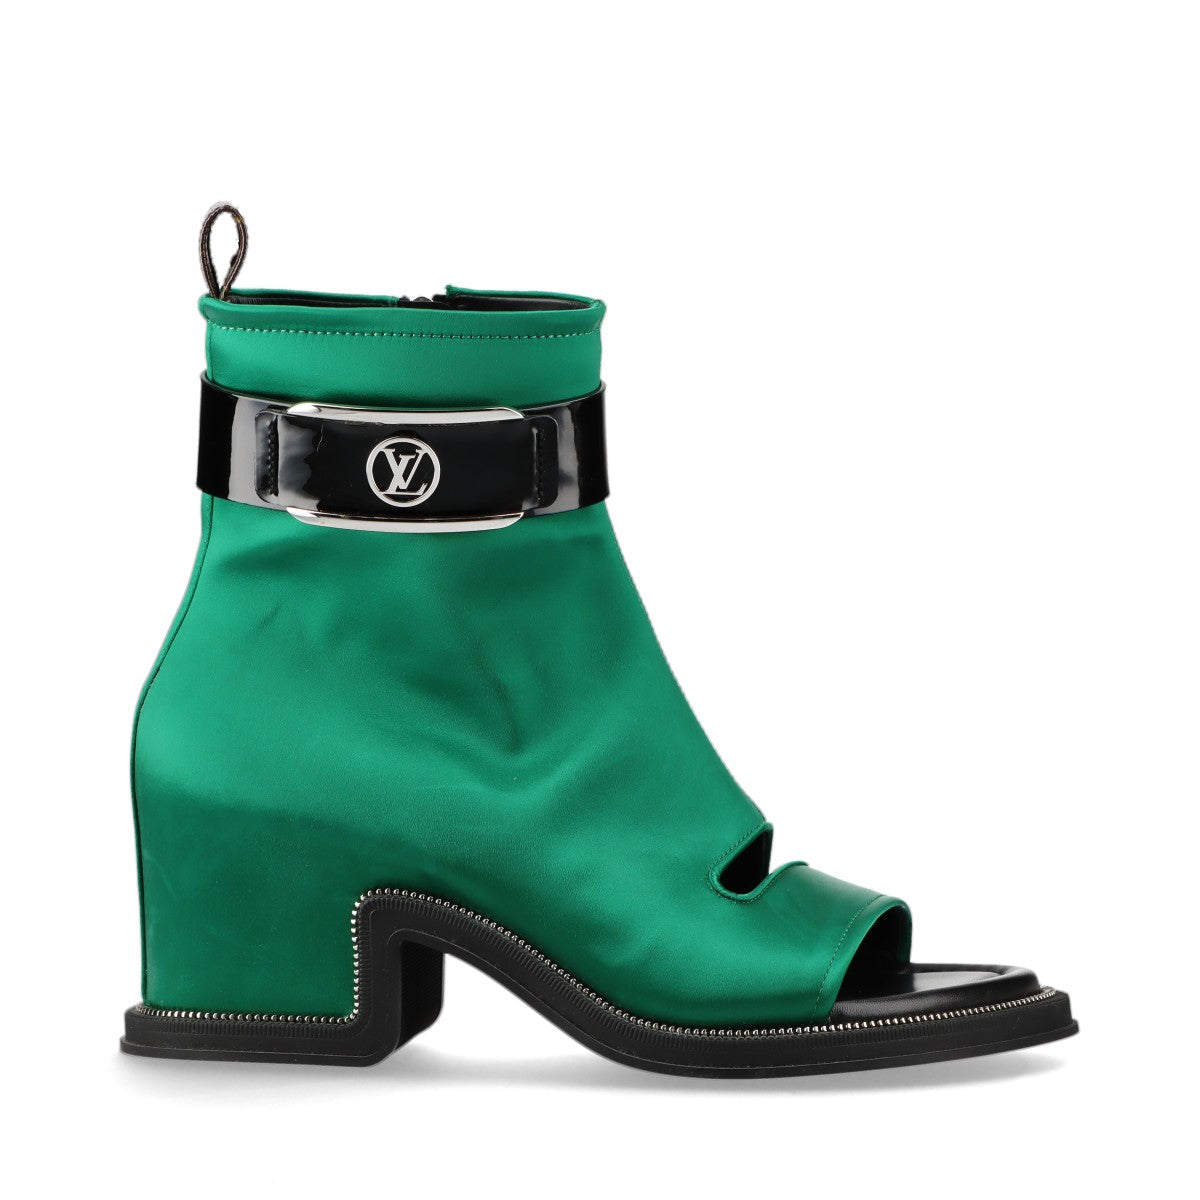 Louis Vuitton moonlight line 22 years Satin x Leather Short Boots EU38 Ladies' Green x black NL0212 Box There is a bag